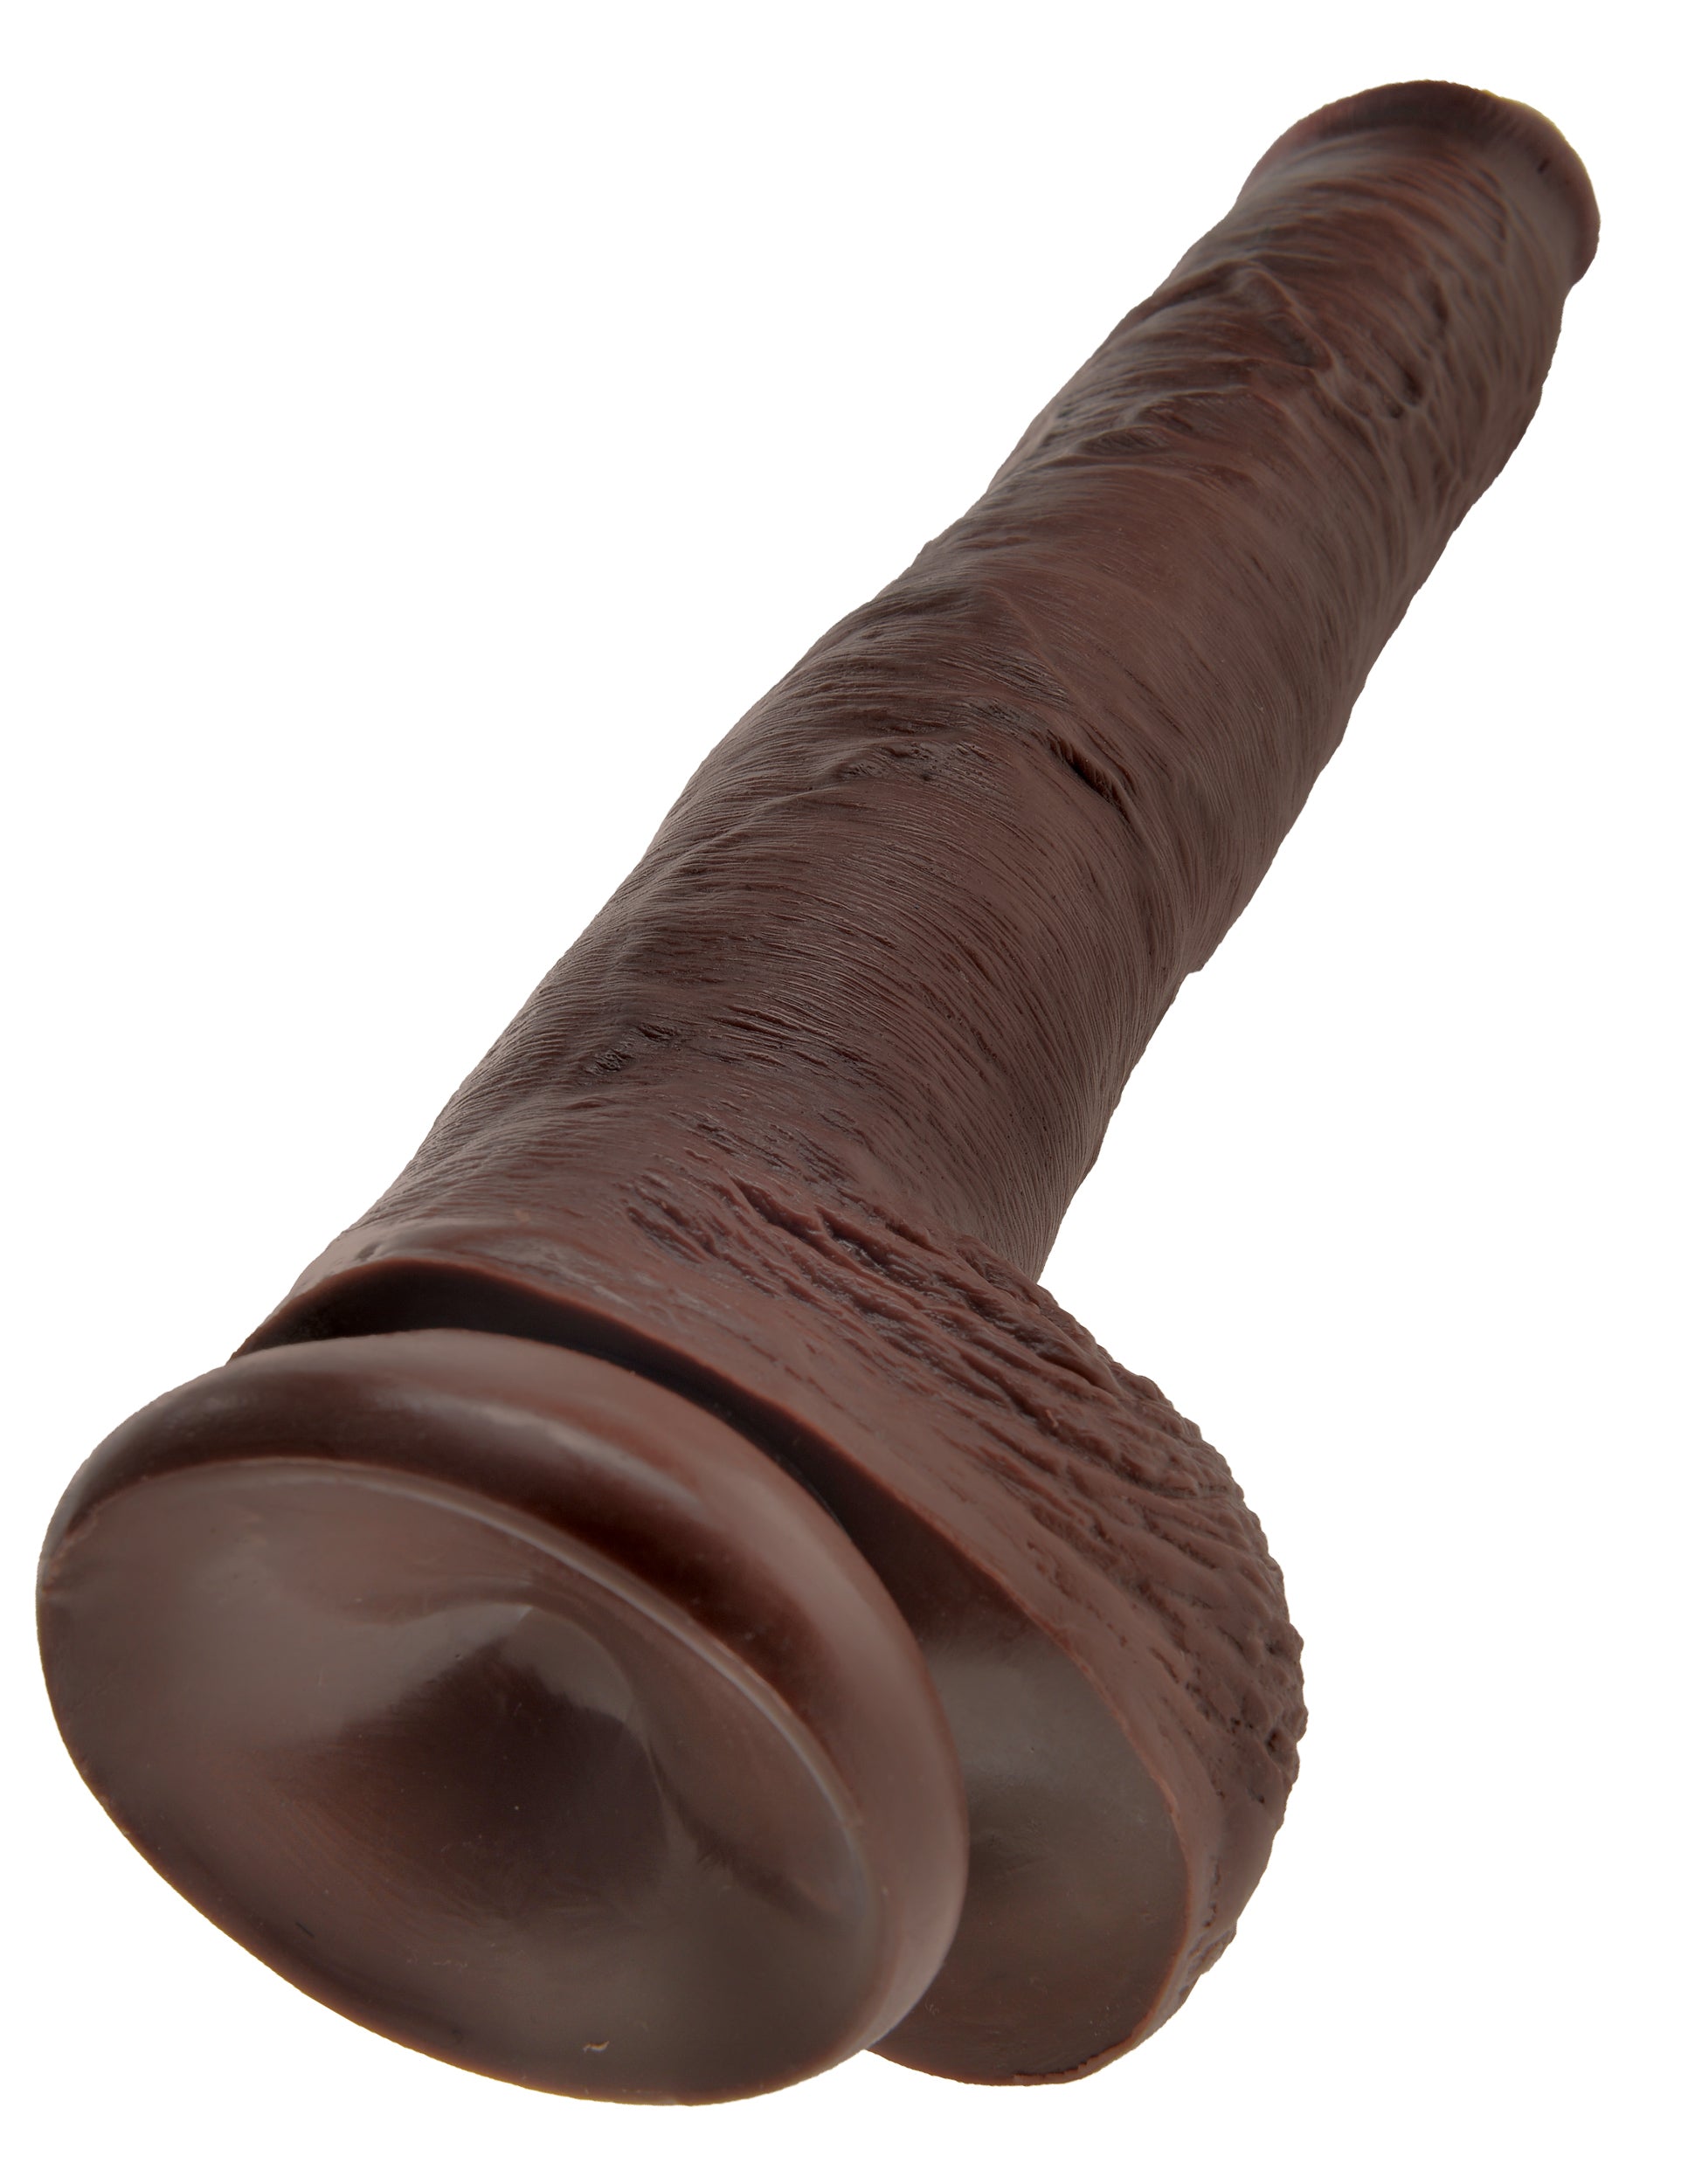 King Cock 14 Inch Cock With Balls - Brown-4